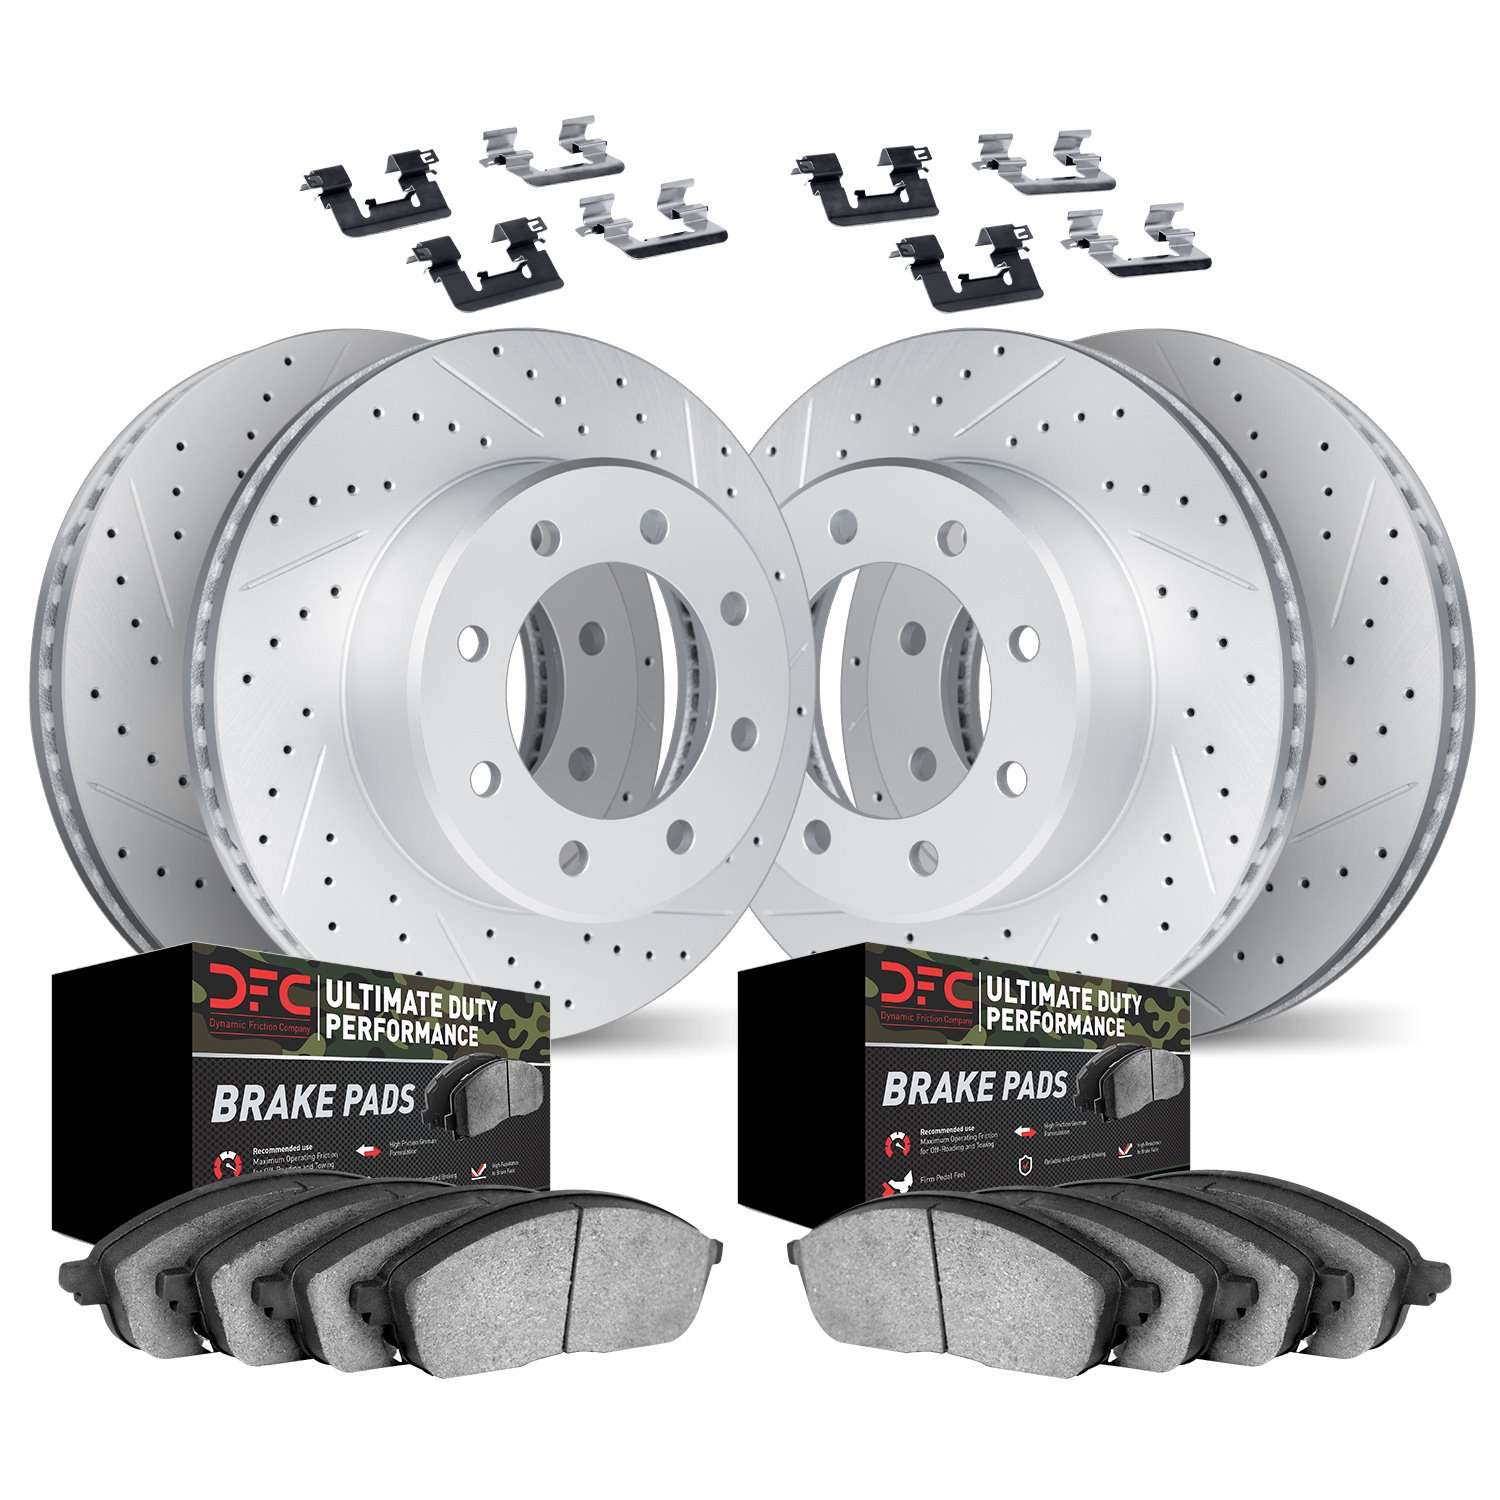 2414-54033 Geoperformance Drilled/Slotted Brake Rotors with Ultimate-Duty Brake Pads Kit & Hardware, 2010-2011 Ford/Lincoln/Merc